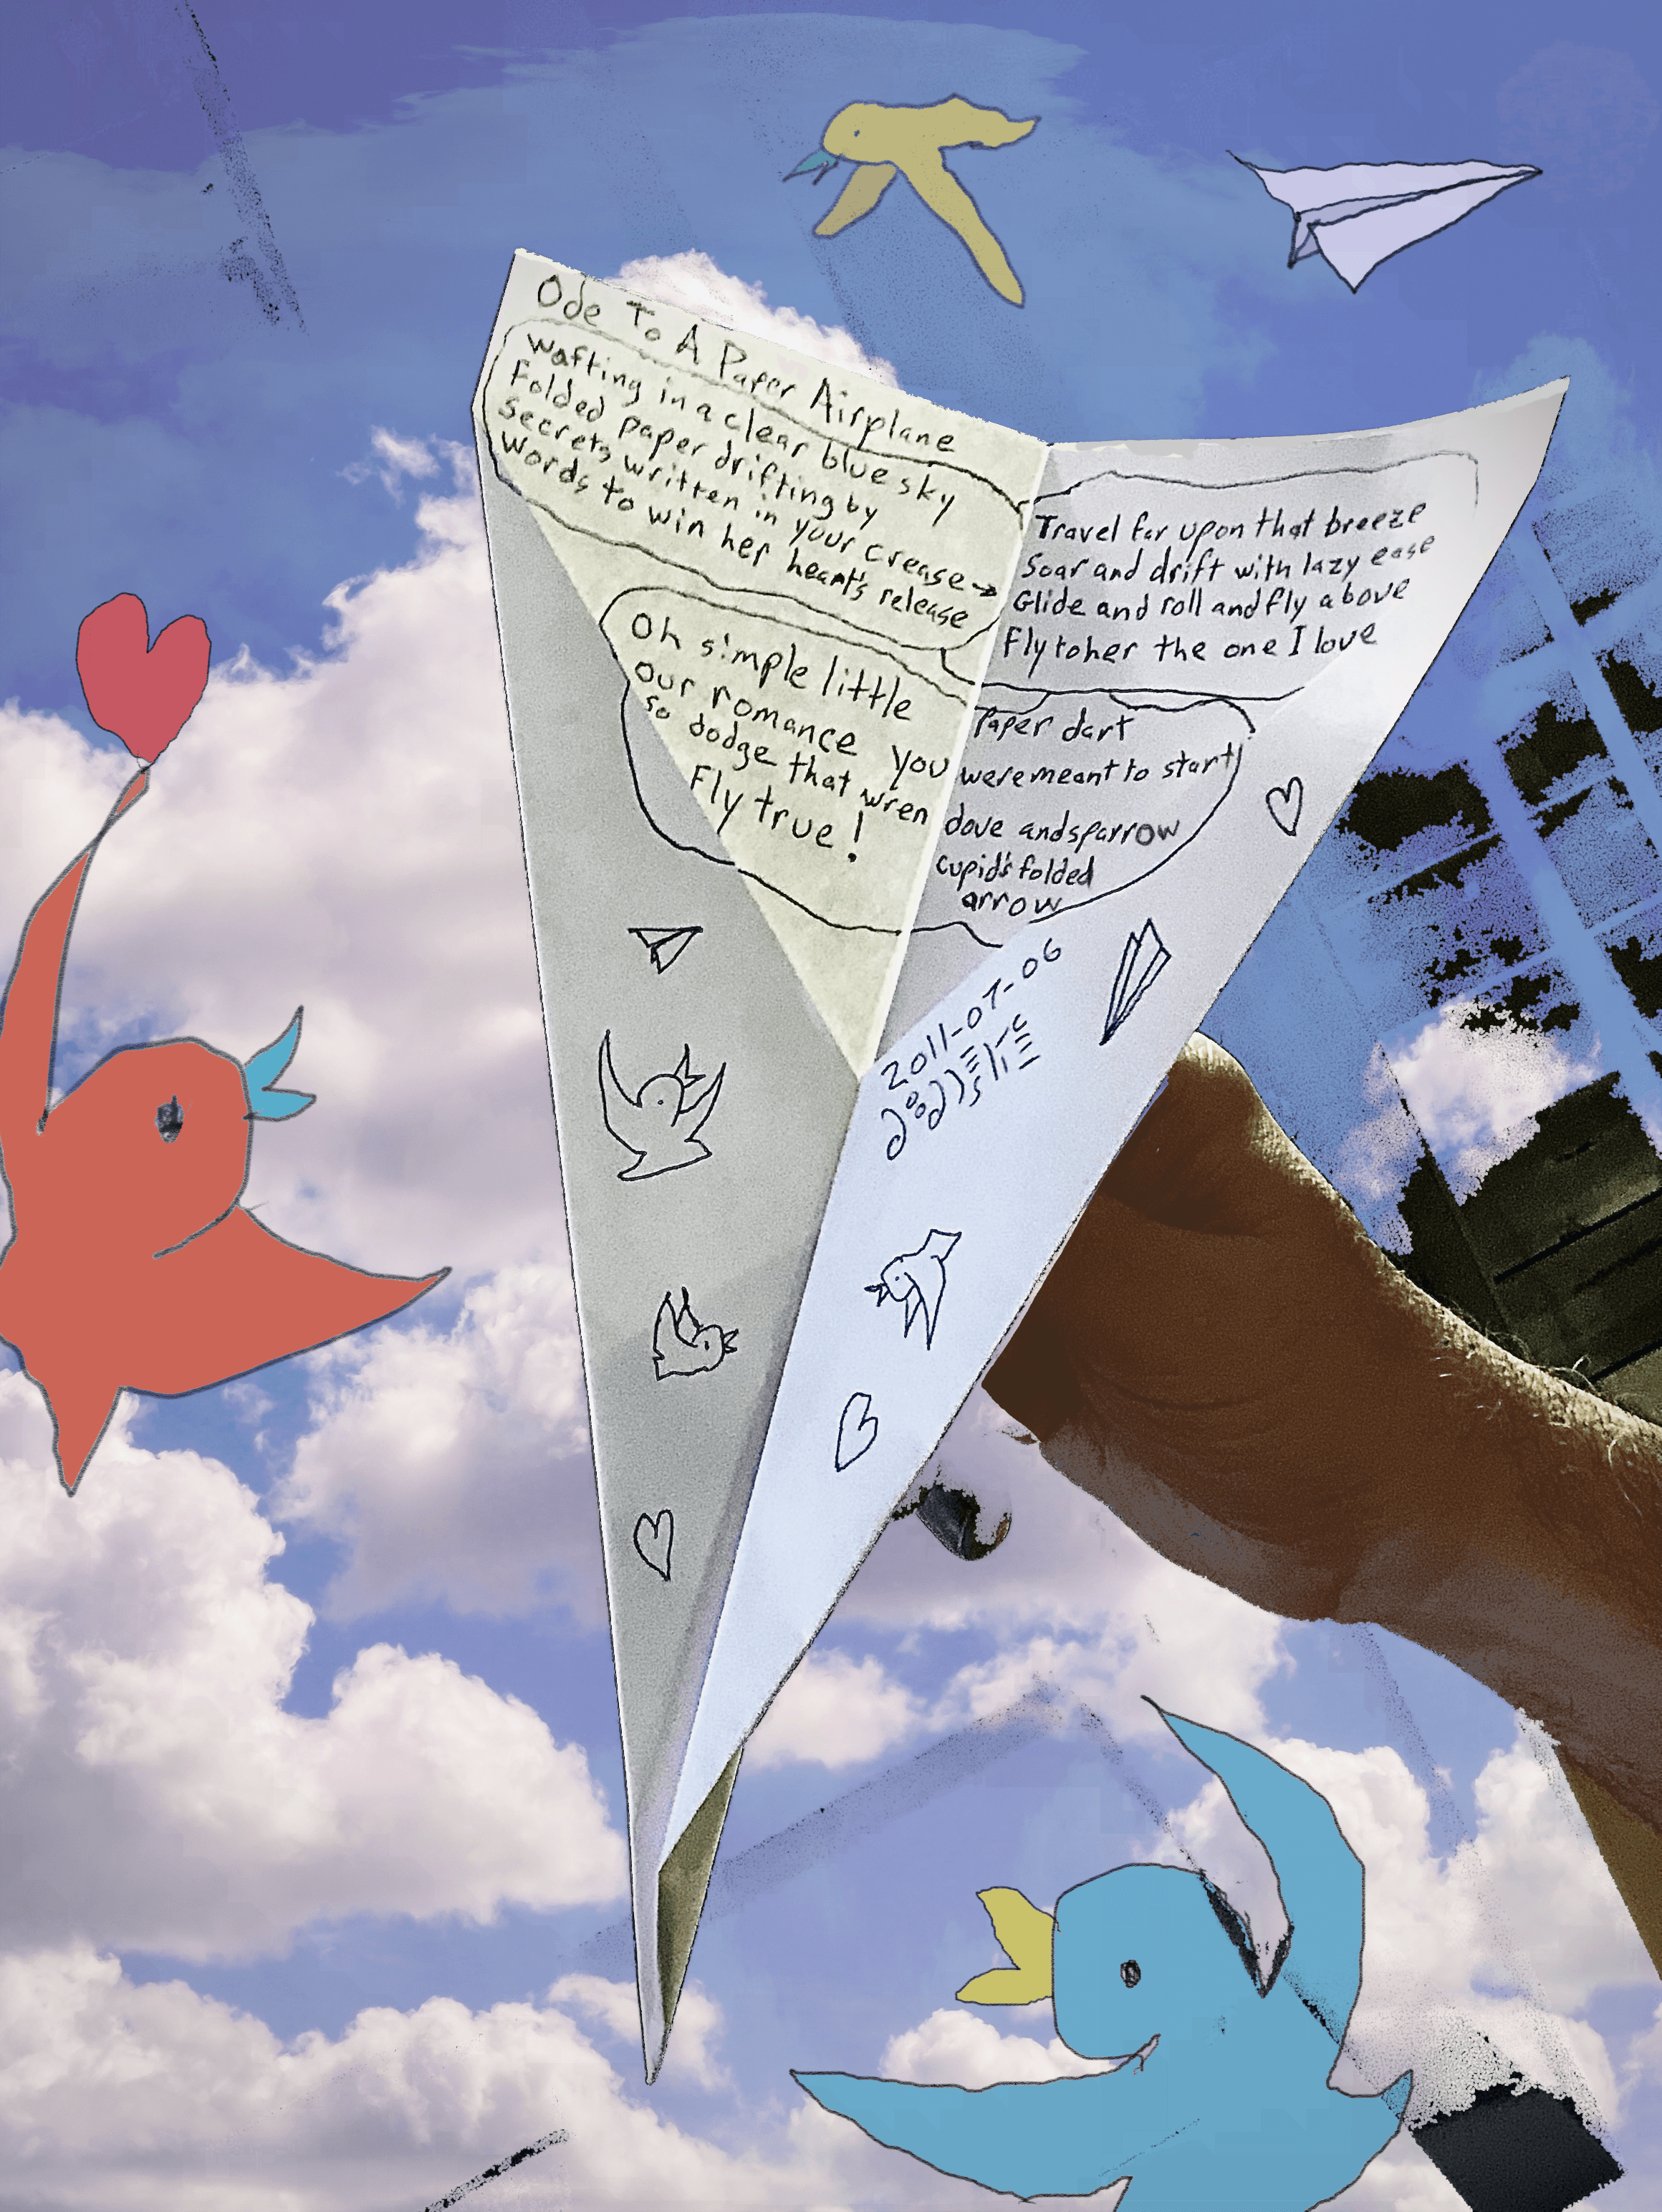 Ode To A Paper Airplane - By Doodleslice